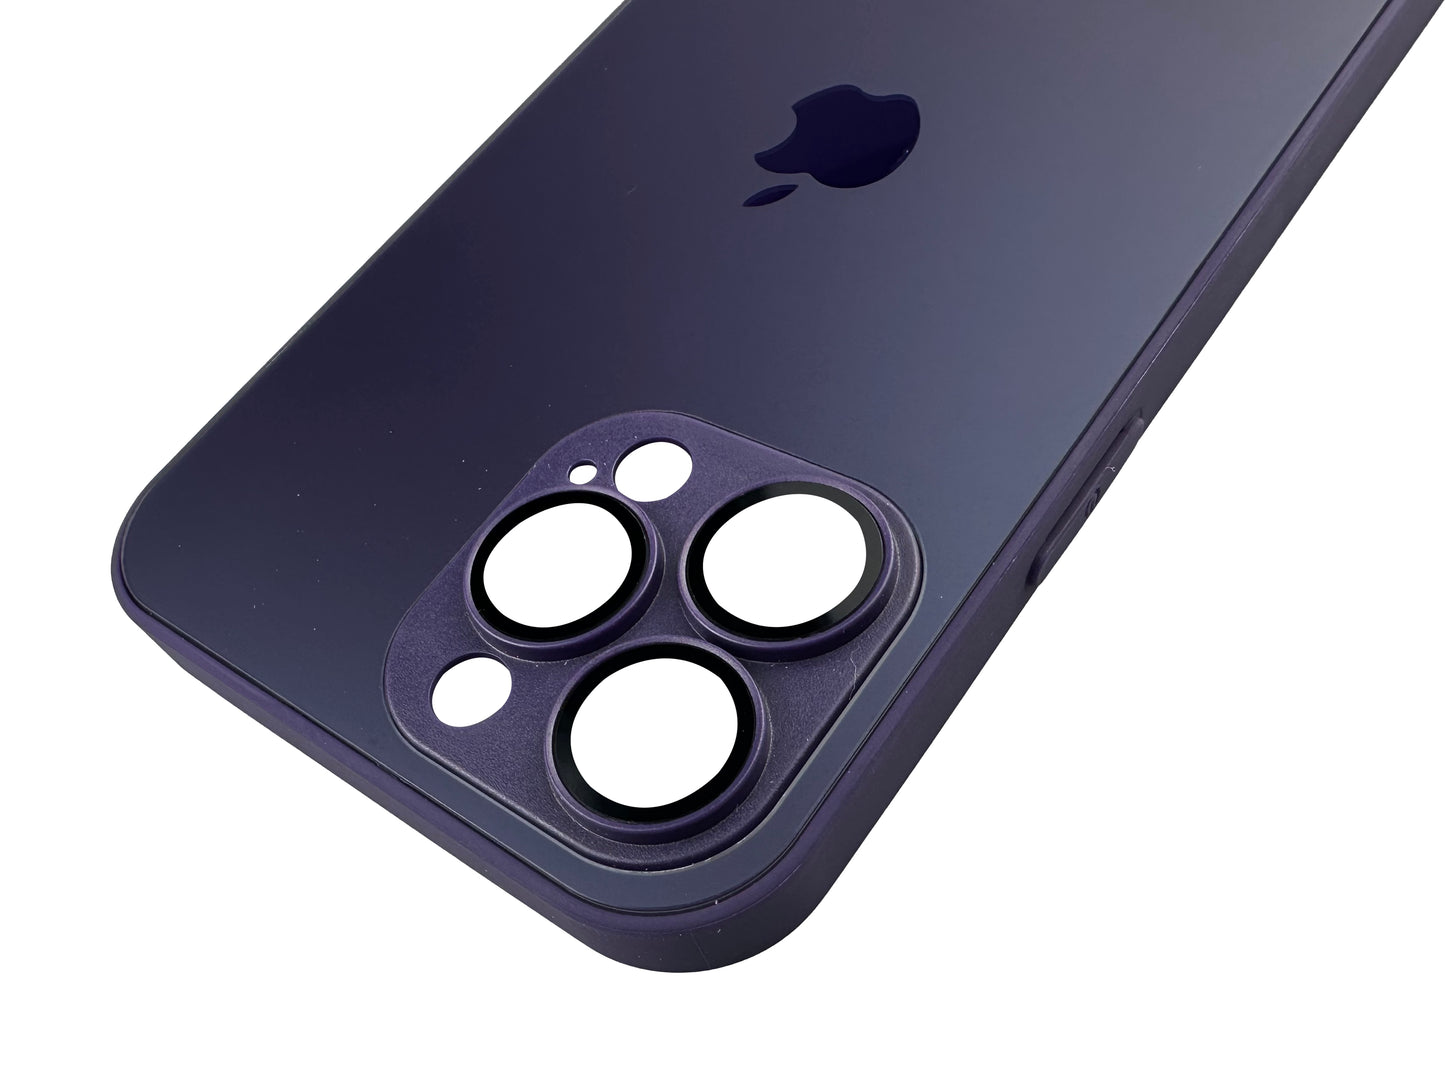 AG Glass Case Iphone 13 Pro Max - Navy